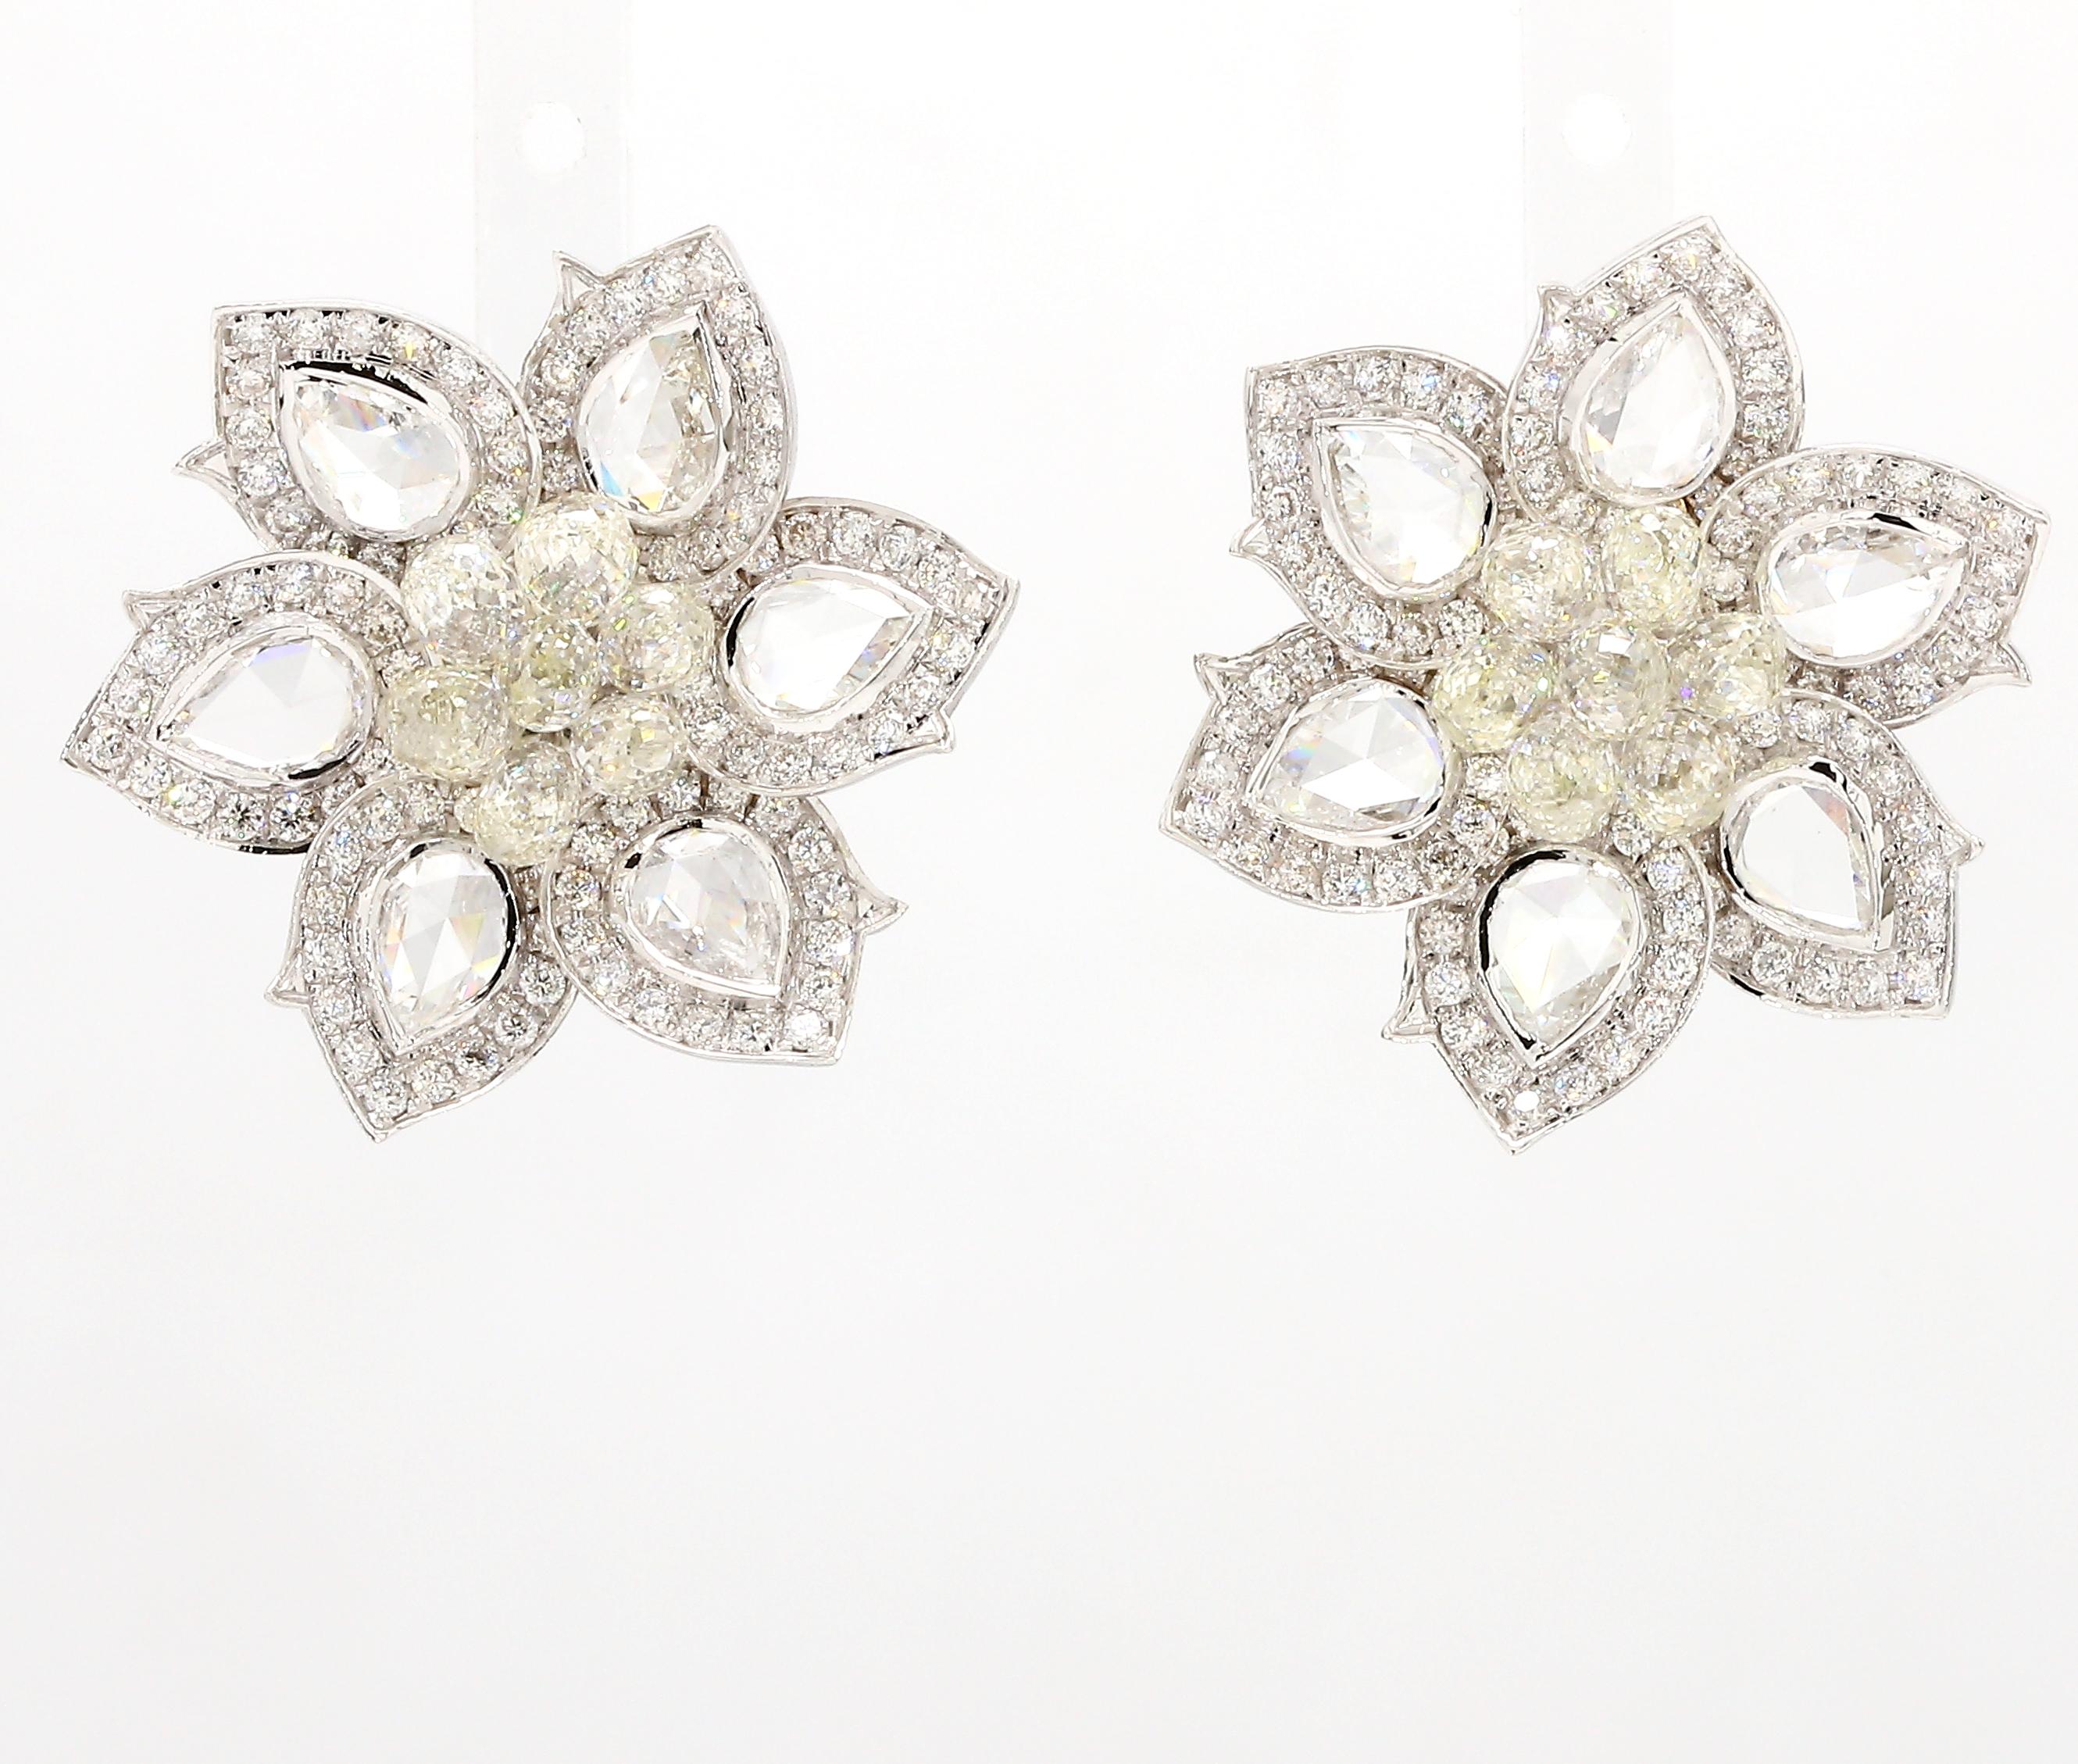 A beautiful rendition of the narcissus flower, the petals features six Pear Shape Diamond Rosecut ,centered with diamond Briolette as a cluster. The earrings are finely handcrafted in 18K White Gold.
These make a fine pair for casual afternoon lunch